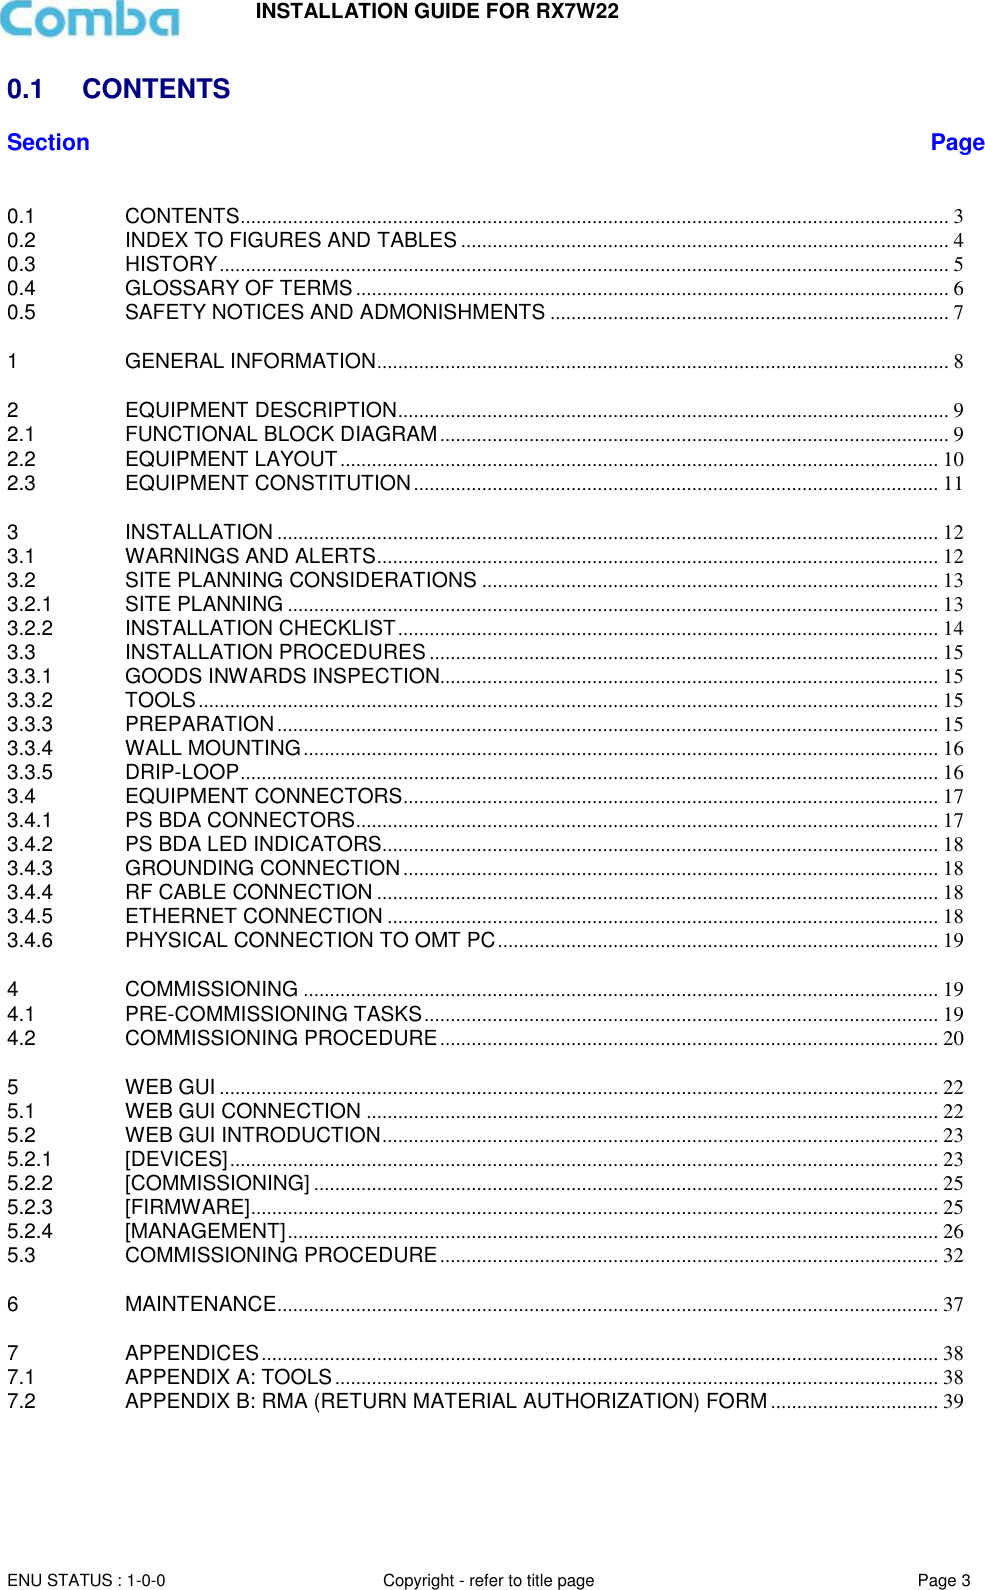 INSTALLATION GUIDE FOR RX7W22  ENU STATUS : 1-0-0 Copyright - refer to title page Page 3     0.1  CONTENTS Section Page  0.1 CONTENTS ....................................................................................................................................... 3 0.2 INDEX TO FIGURES AND TABLES ............................................................................................. 4 0.3 HISTORY ........................................................................................................................................... 5 0.4 GLOSSARY OF TERMS ................................................................................................................. 6 0.5 SAFETY NOTICES AND ADMONISHMENTS ............................................................................ 7 1 GENERAL INFORMATION ............................................................................................................. 8 2 EQUIPMENT DESCRIPTION ......................................................................................................... 9 2.1 FUNCTIONAL BLOCK DIAGRAM ................................................................................................. 9 2.2 EQUIPMENT LAYOUT .................................................................................................................. 10 2.3 EQUIPMENT CONSTITUTION .................................................................................................... 11 3 INSTALLATION .............................................................................................................................. 12 3.1 WARNINGS AND ALERTS ........................................................................................................... 12 3.2 SITE PLANNING CONSIDERATIONS ....................................................................................... 13 3.2.1 SITE PLANNING ............................................................................................................................ 13 3.2.2 INSTALLATION CHECKLIST ....................................................................................................... 14 3.3 INSTALLATION PROCEDURES ................................................................................................. 15 3.3.1 GOODS INWARDS INSPECTION............................................................................................... 15 3.3.2 TOOLS ............................................................................................................................................. 15 3.3.3 PREPARATION .............................................................................................................................. 15 3.3.4 WALL MOUNTING ......................................................................................................................... 16 3.3.5 DRIP-LOOP ..................................................................................................................................... 16 3.4 EQUIPMENT CONNECTORS ...................................................................................................... 17 3.4.1 PS BDA CONNECTORS ............................................................................................................... 17 3.4.2 PS BDA LED INDICATORS.......................................................................................................... 18 3.4.3 GROUNDING CONNECTION ...................................................................................................... 18 3.4.4 RF CABLE CONNECTION ........................................................................................................... 18 3.4.5 ETHERNET CONNECTION ......................................................................................................... 18 3.4.6 PHYSICAL CONNECTION TO OMT PC .................................................................................... 19 4 COMMISSIONING ......................................................................................................................... 19 4.1 PRE-COMMISSIONING TASKS .................................................................................................. 19 4.2 COMMISSIONING PROCEDURE ............................................................................................... 20 5 WEB GUI ......................................................................................................................................... 22 5.1 WEB GUI CONNECTION ............................................................................................................. 22 5.2 WEB GUI INTRODUCTION .......................................................................................................... 23 5.2.1 [DEVICES] ....................................................................................................................................... 23 5.2.2 [COMMISSIONING] ....................................................................................................................... 25 5.2.3 [FIRMWARE] ................................................................................................................................... 25 5.2.4 [MANAGEMENT] ............................................................................................................................ 26 5.3 COMMISSIONING PROCEDURE ............................................................................................... 32 6 MAINTENANCE .............................................................................................................................. 37 7 APPENDICES ................................................................................................................................. 38 7.1 APPENDIX A: TOOLS ................................................................................................................... 38 7.2 APPENDIX B: RMA (RETURN MATERIAL AUTHORIZATION) FORM ................................ 39     